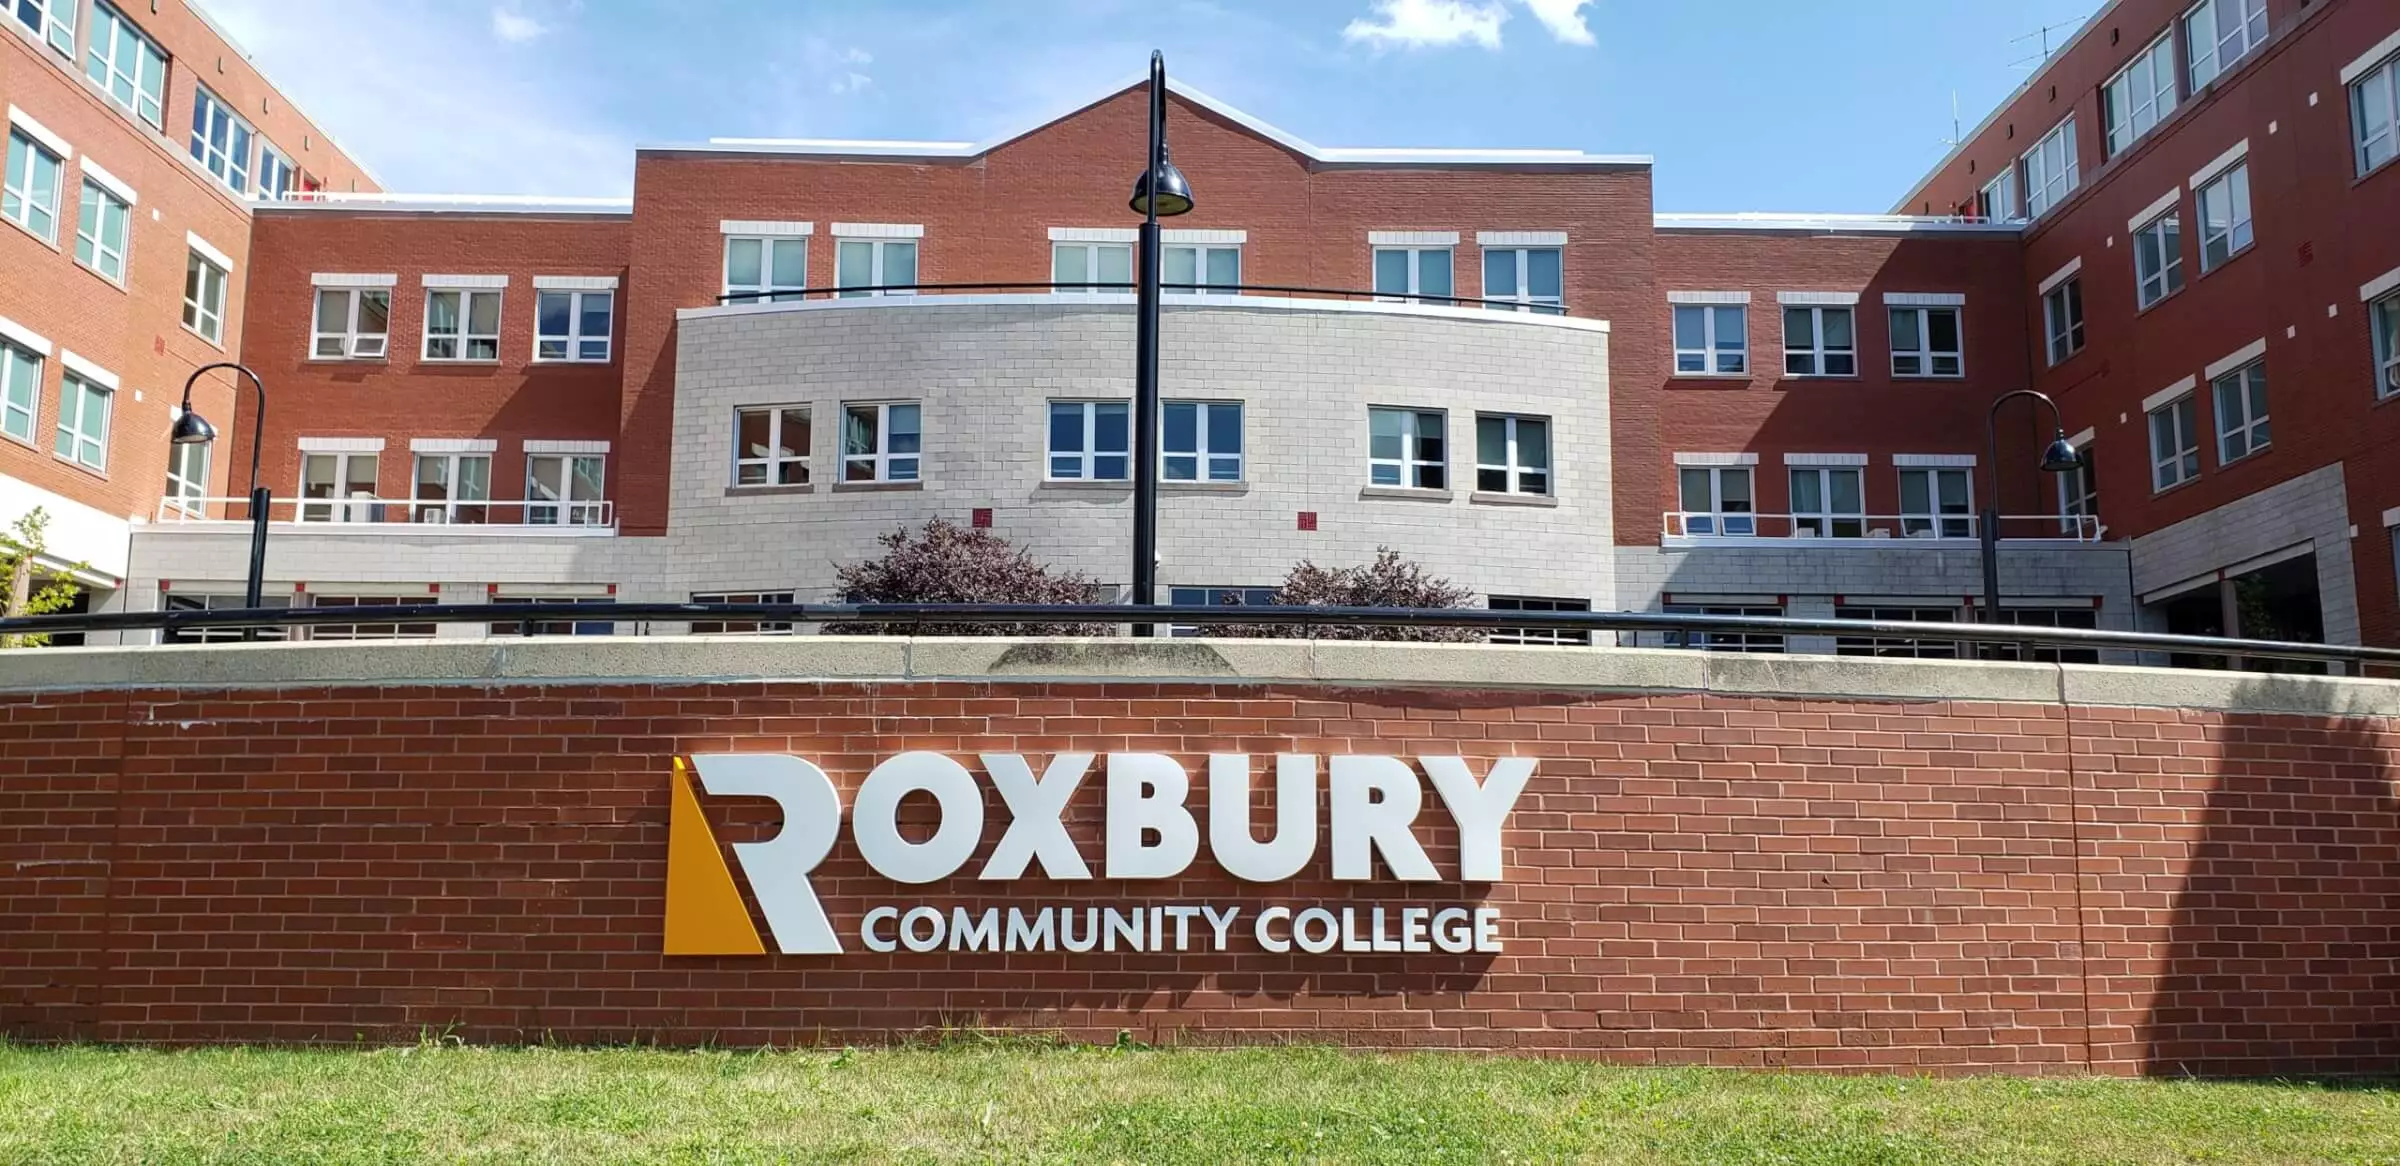 Roxbury Community College Selects YuJa Enterprise Video Platform to Provide Content Management and Quizzing Tools Sitewide